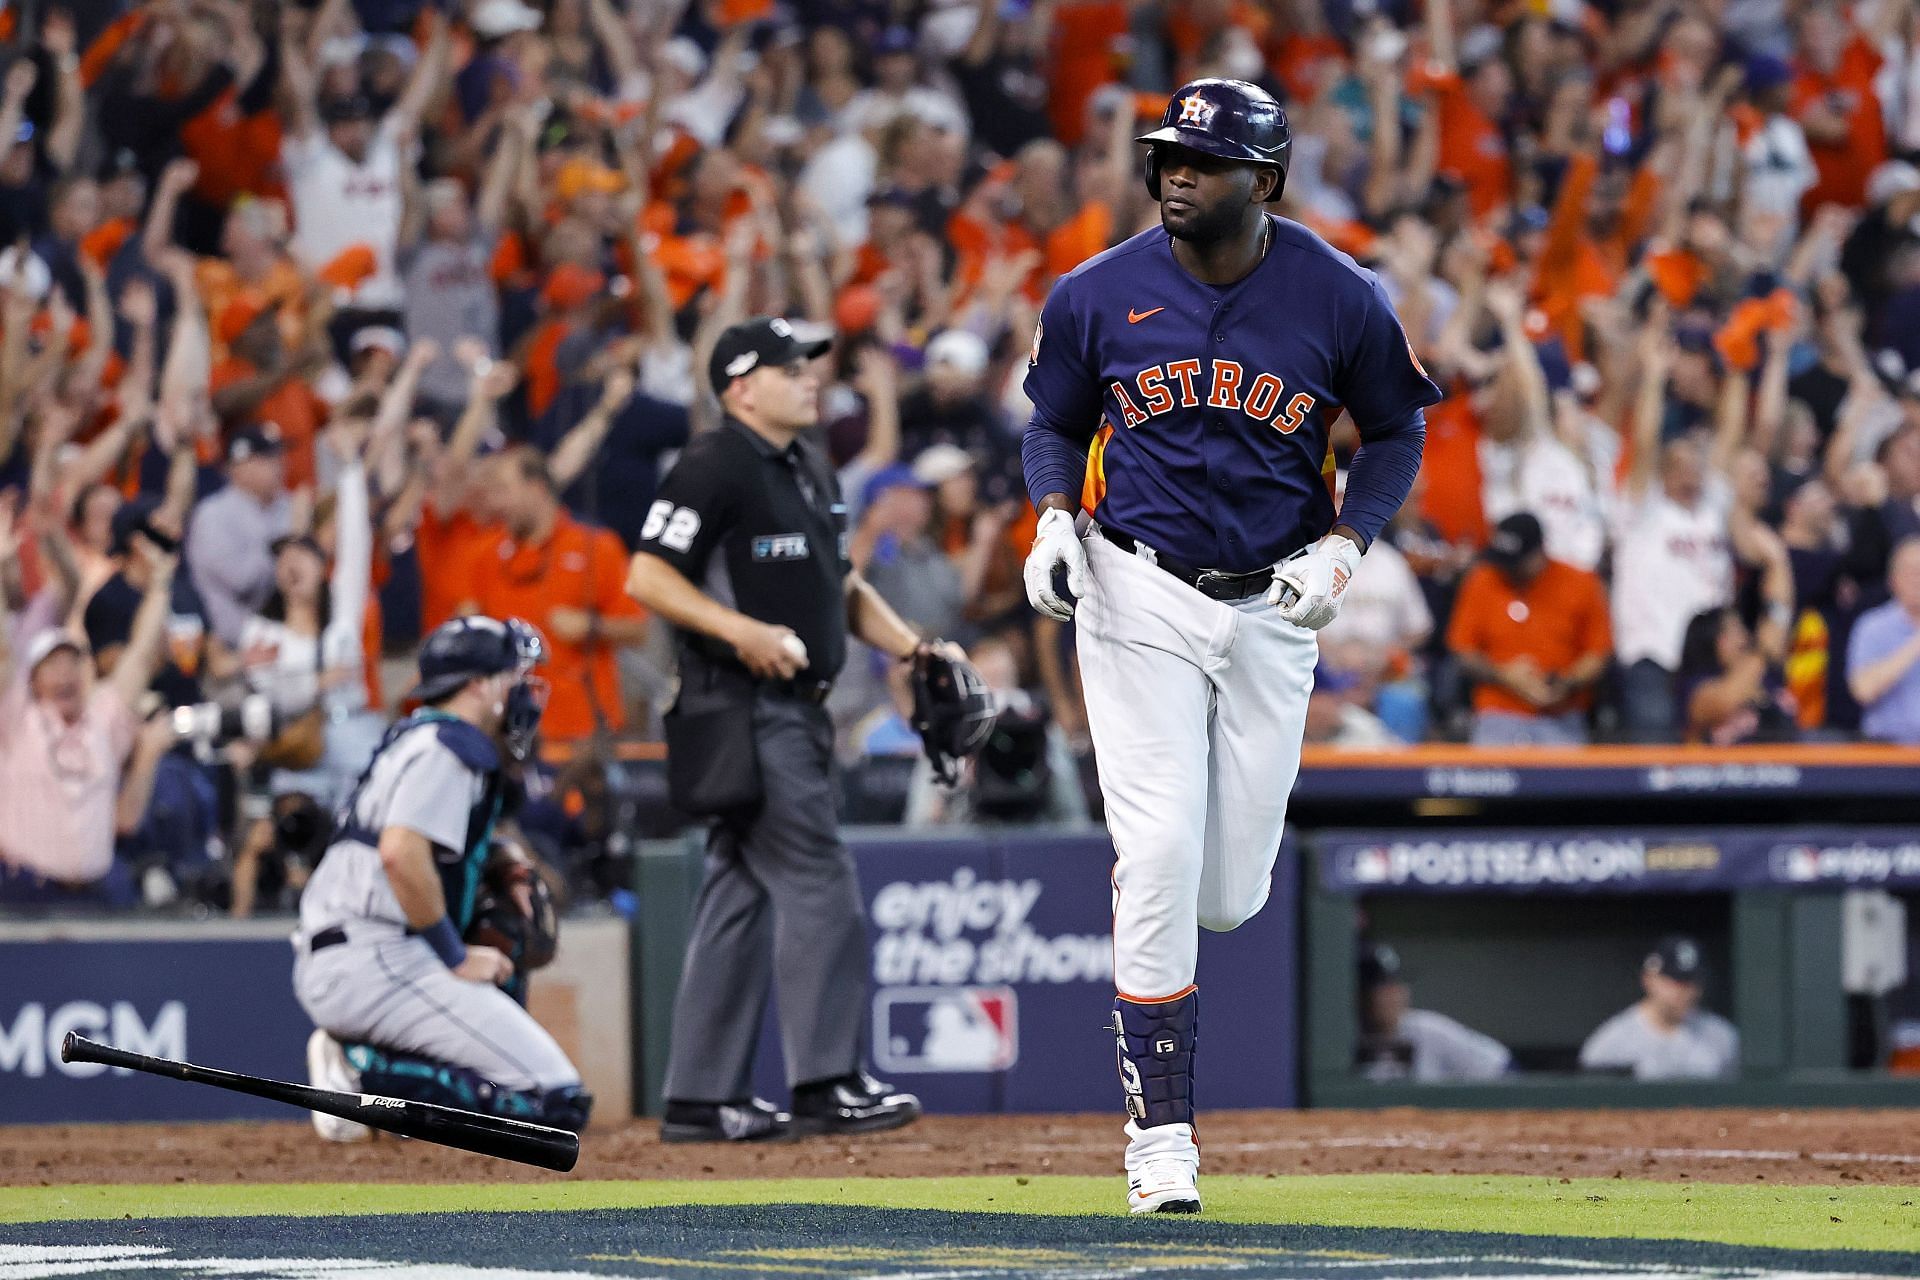 Houston Astros players swallowed up in Twitter frenzy over separate cheating  allegations